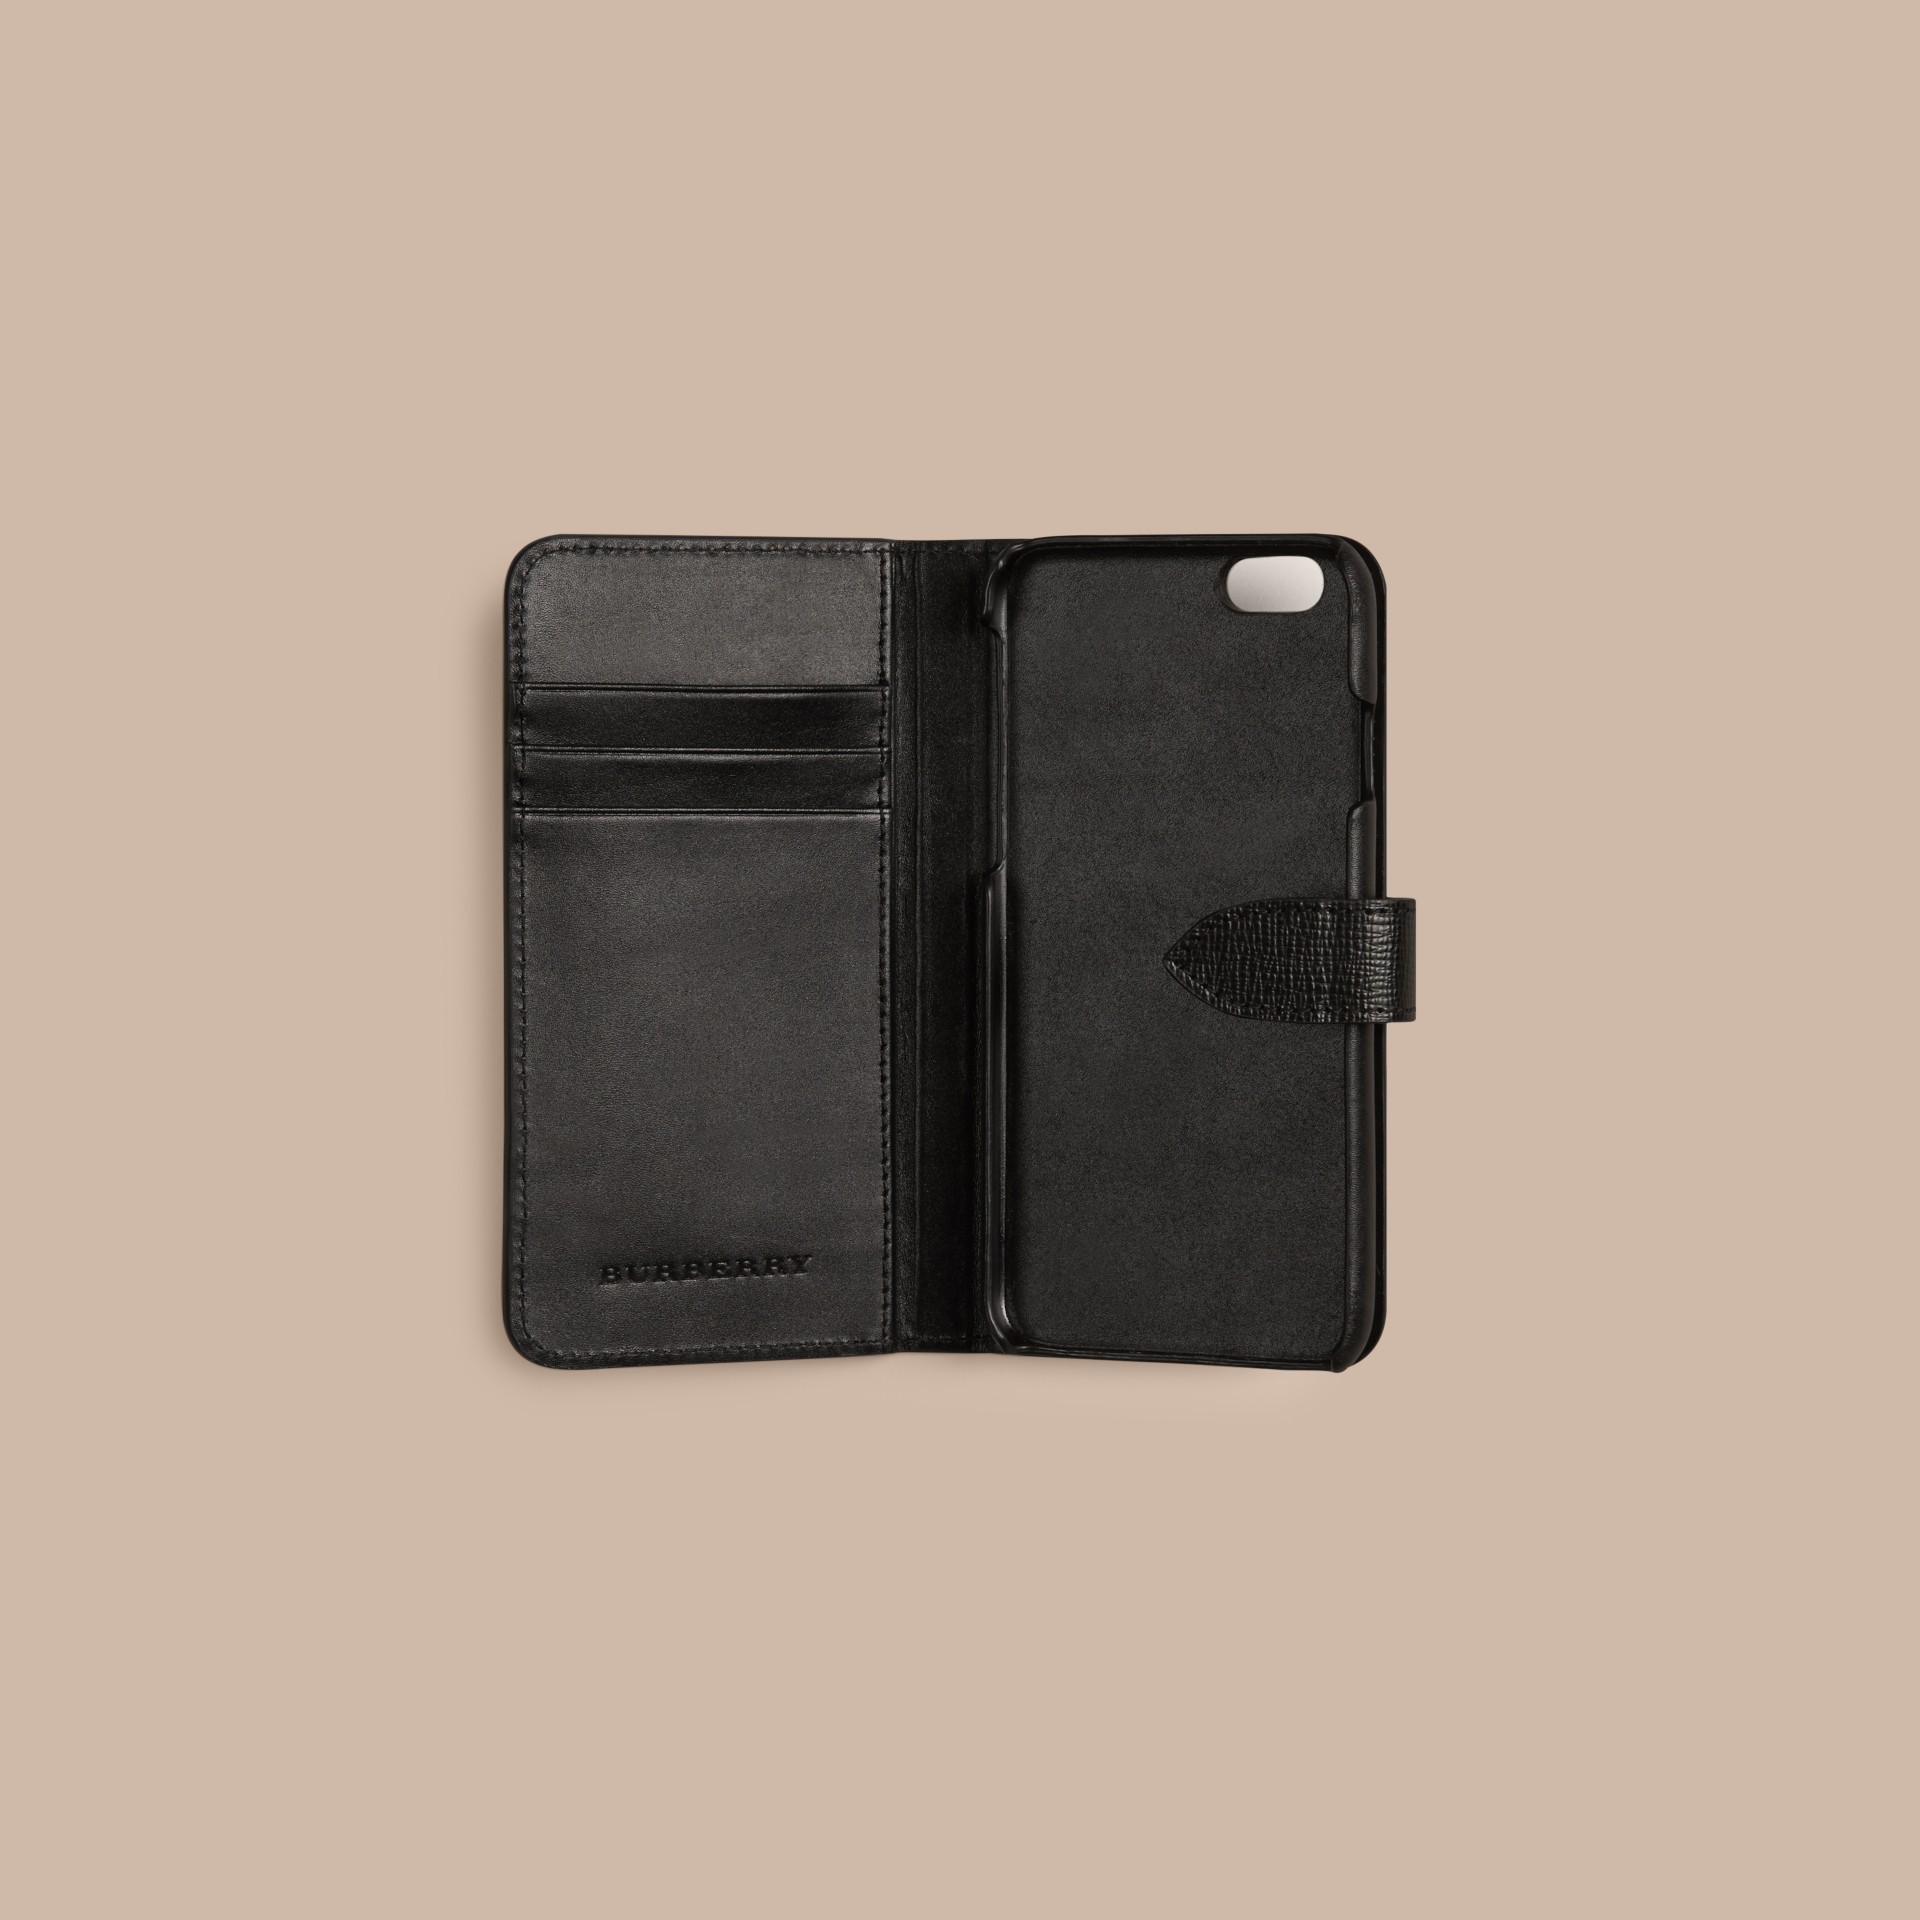 London Leather iPhone 6 Flip Case in Black - Men | Burberry United States